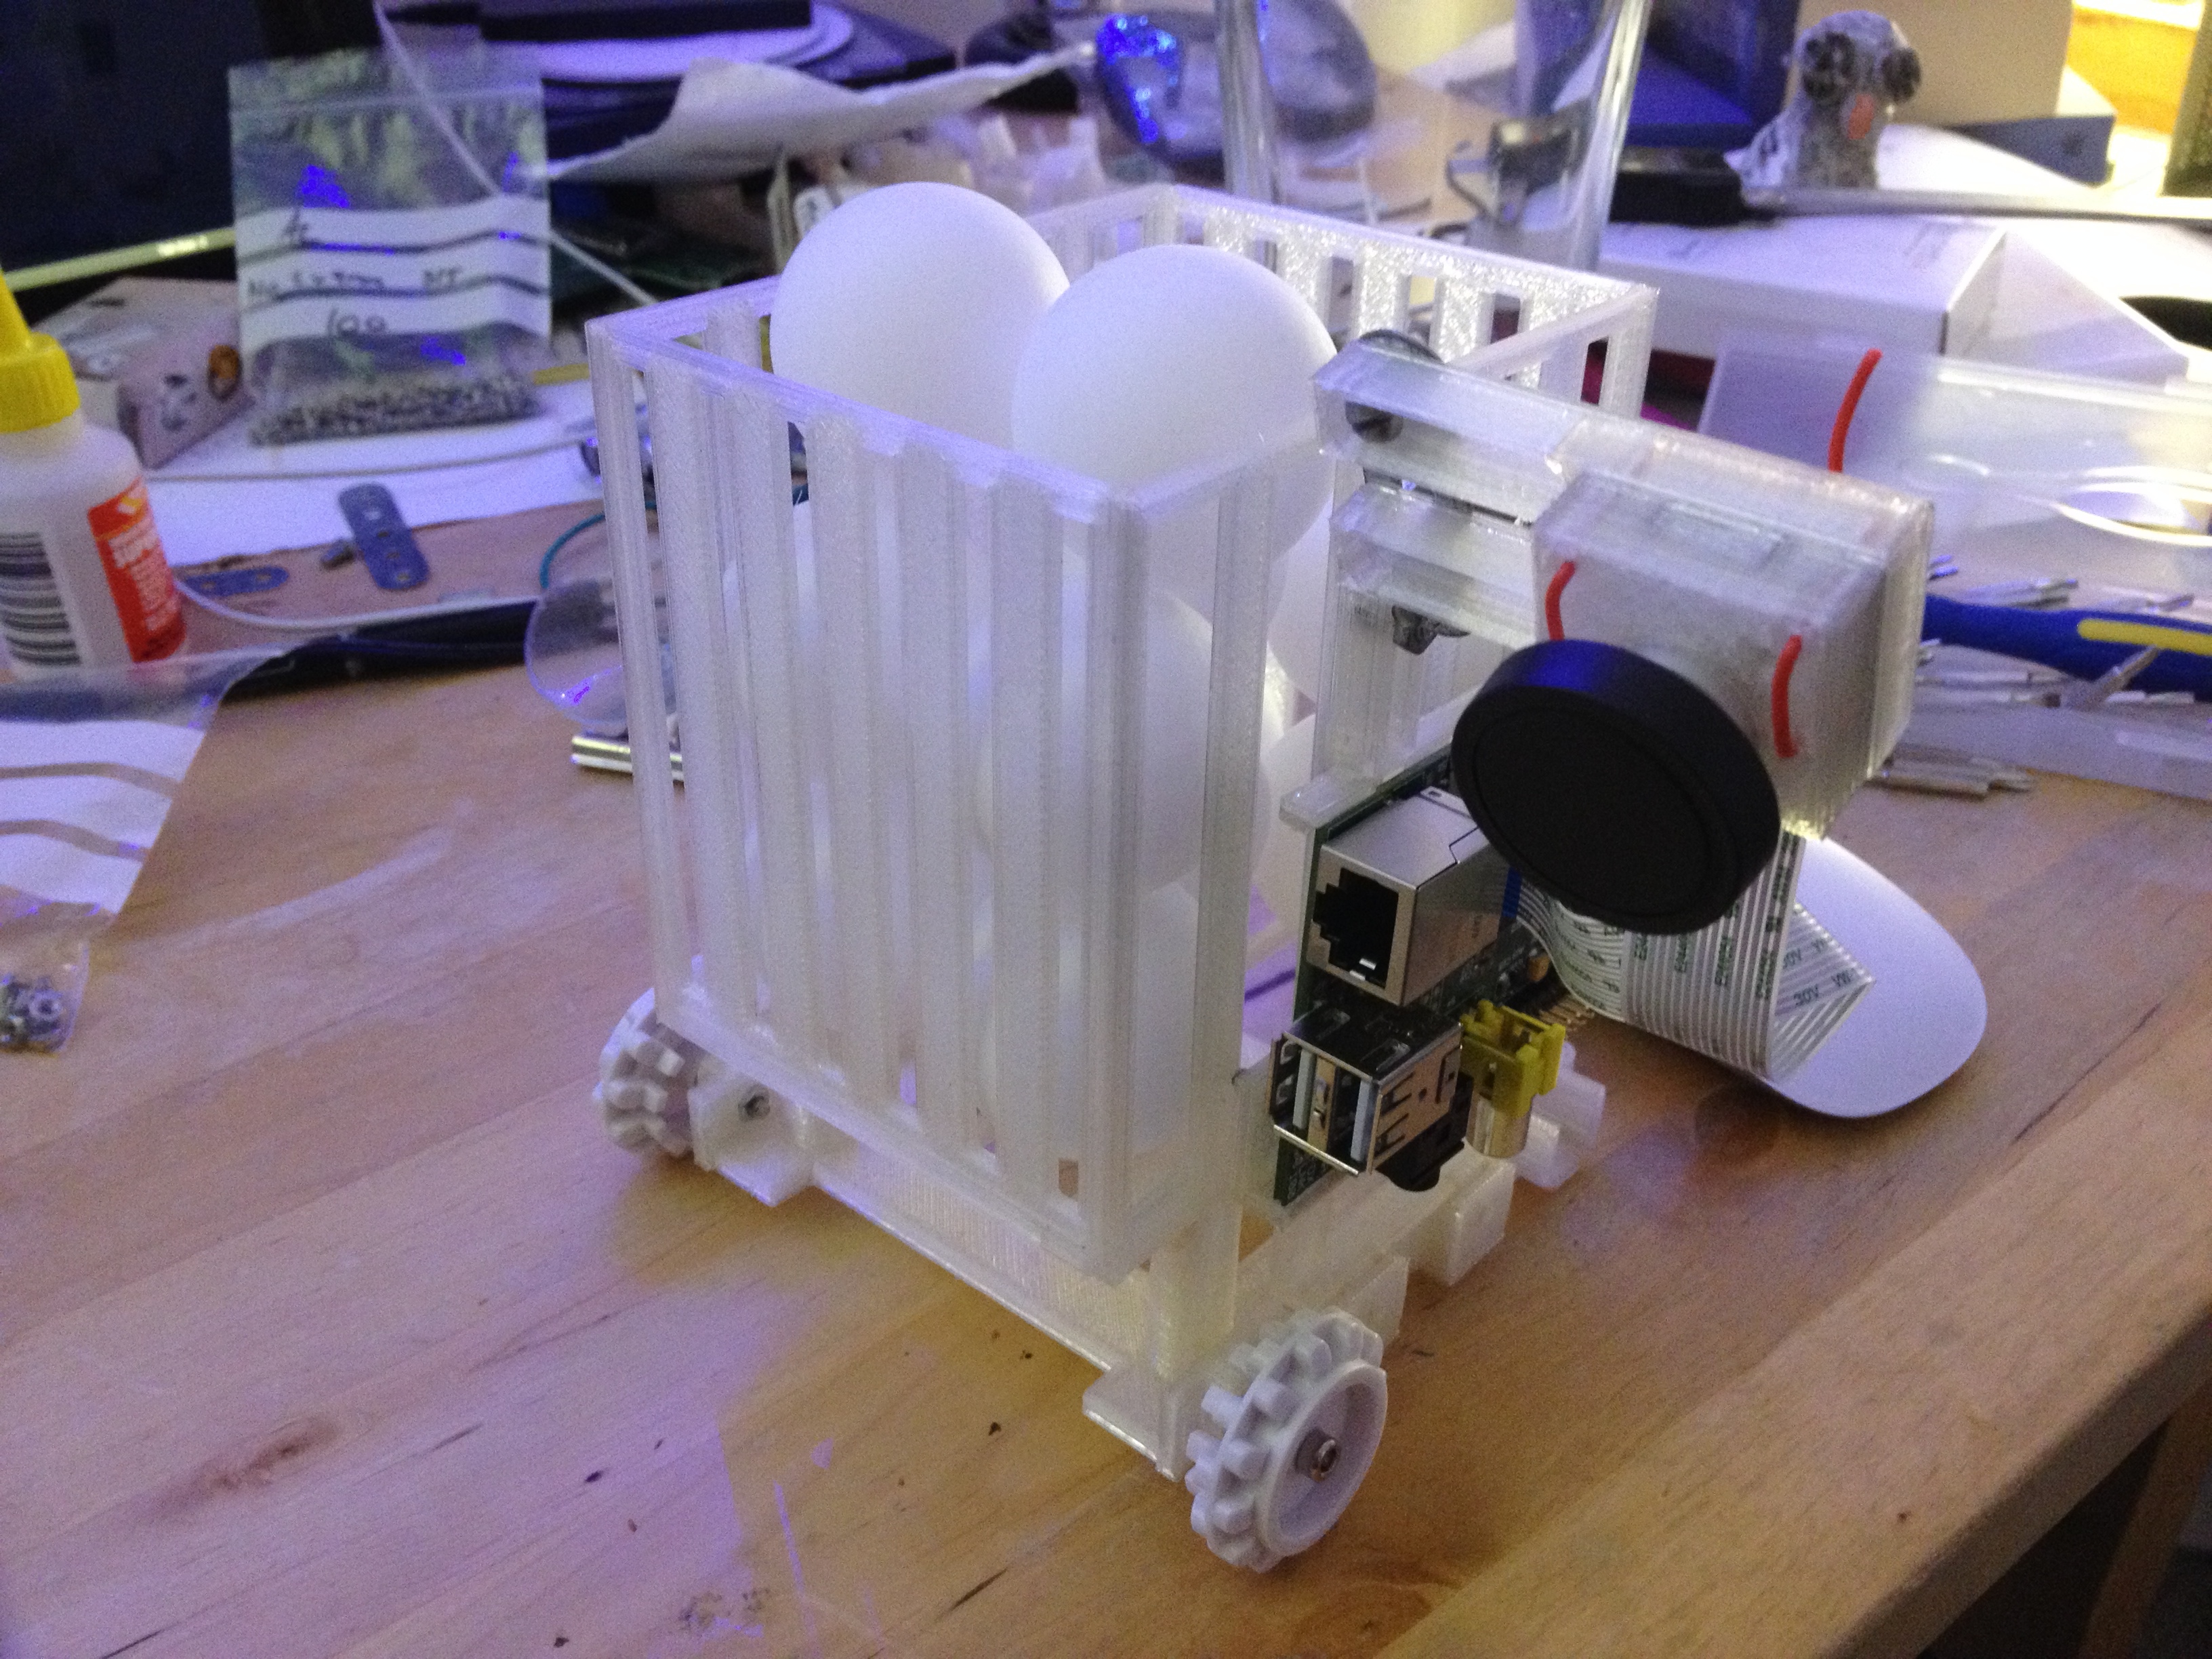 The ping-pong ball hopper mounted on the robot